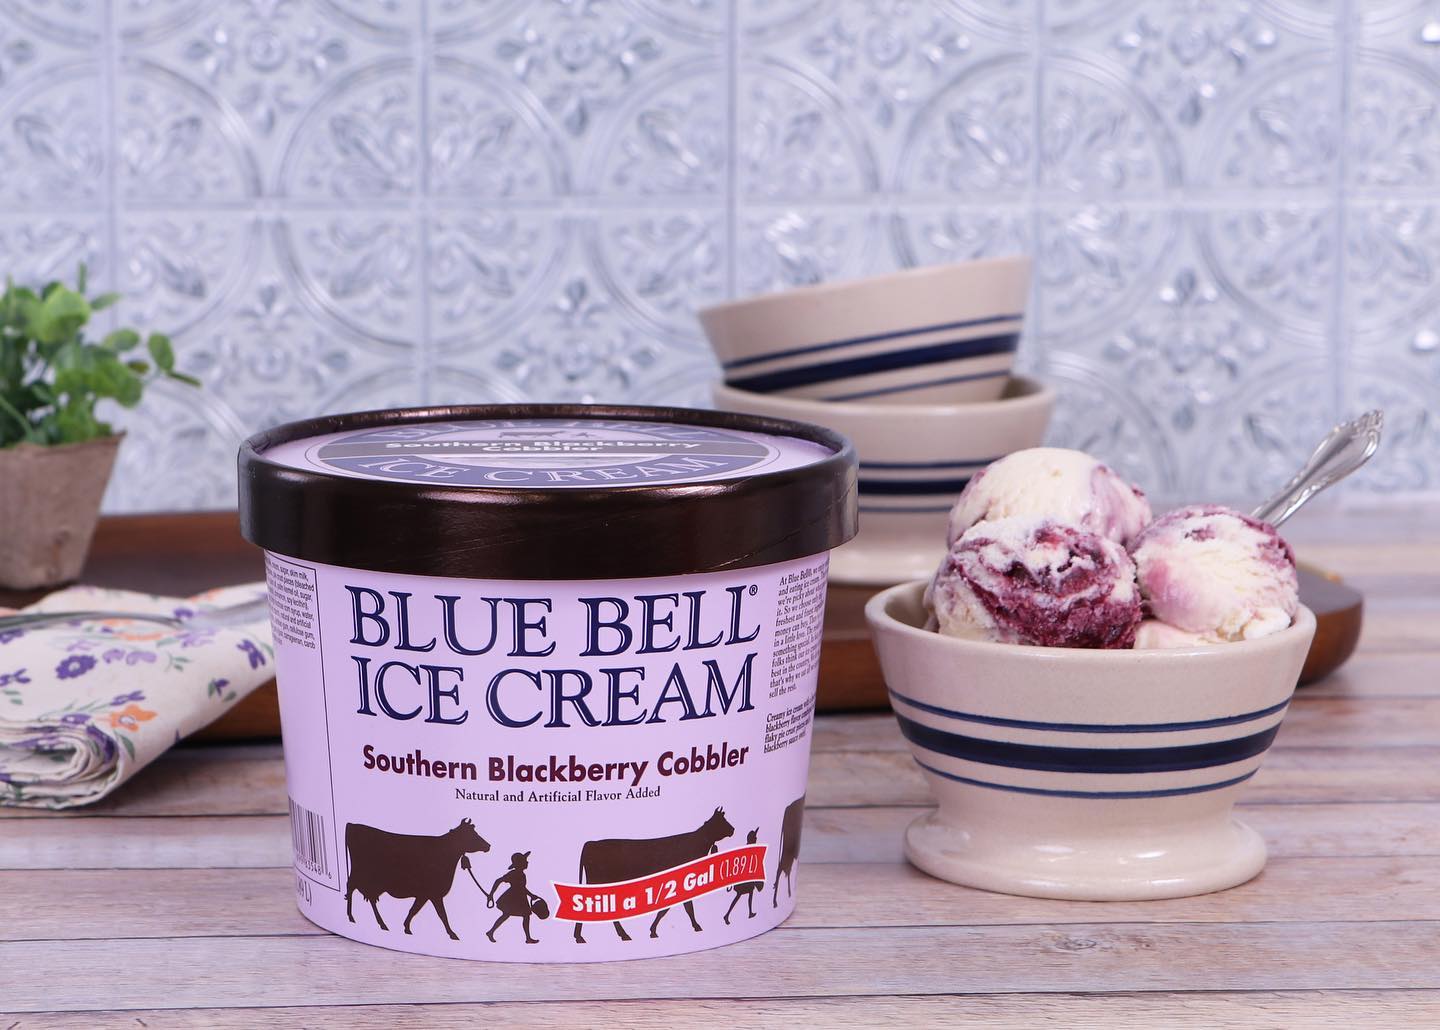 The best flavor of Blue Bell ice cream has returned to shelves